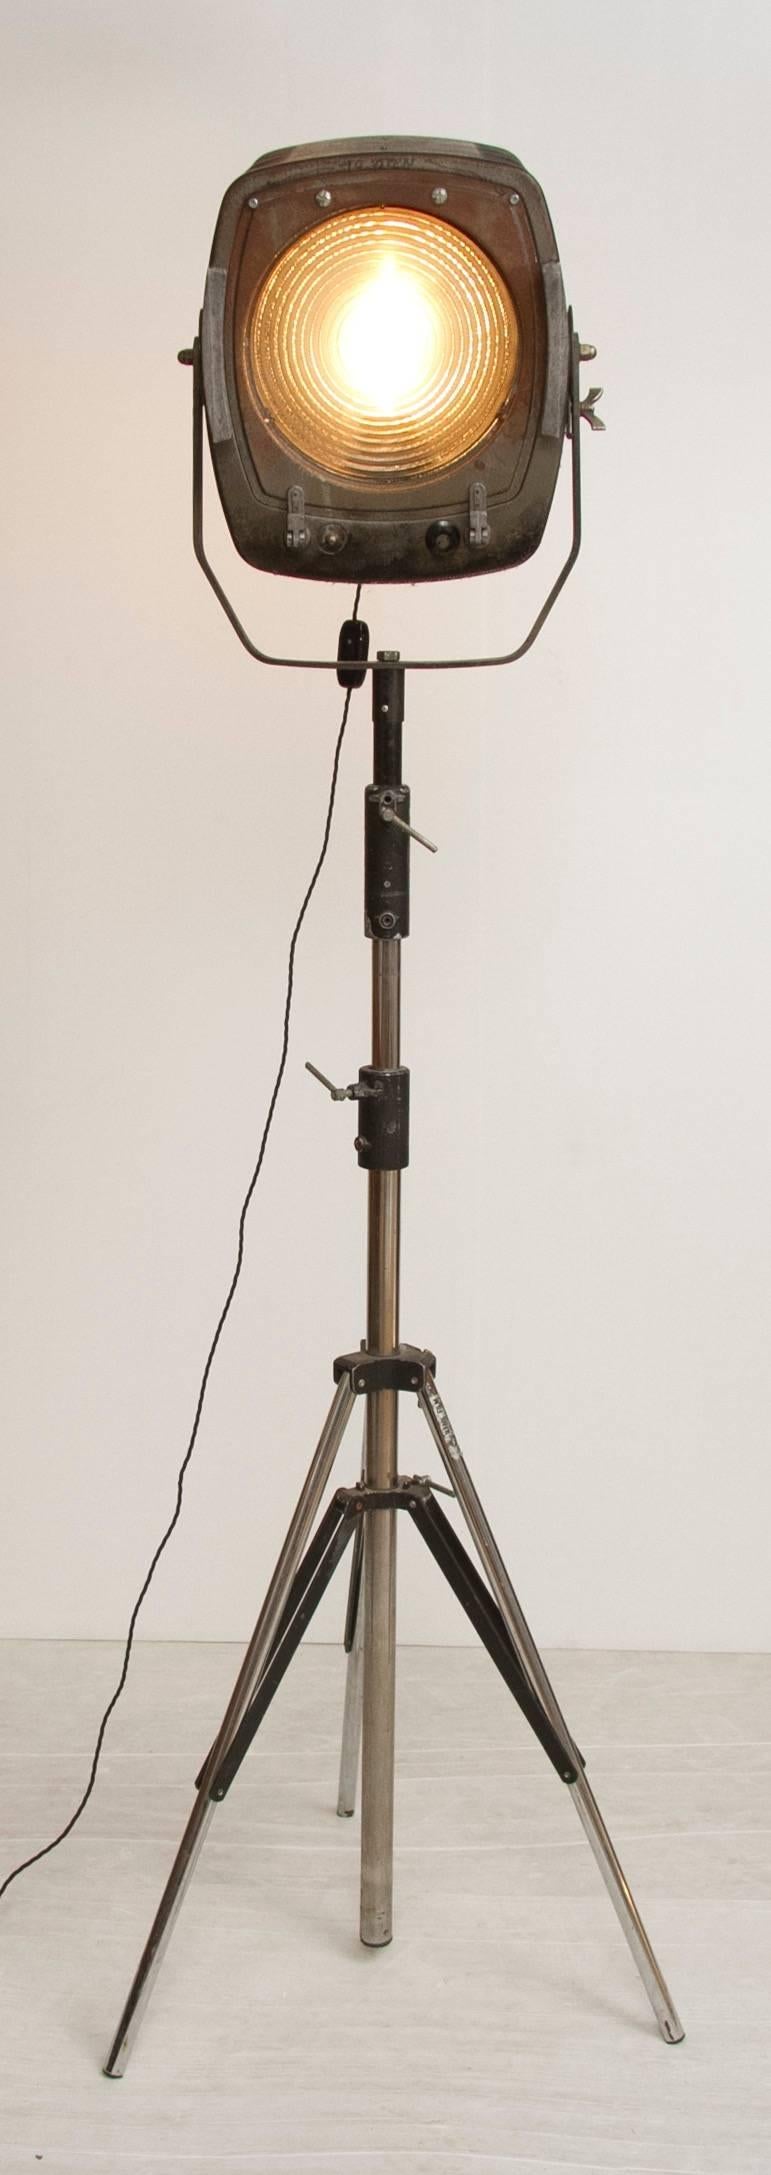 Art Deco Vintage Theatre Light from Rank Film Equipment on Telescopic Tri Pod Stand For Sale